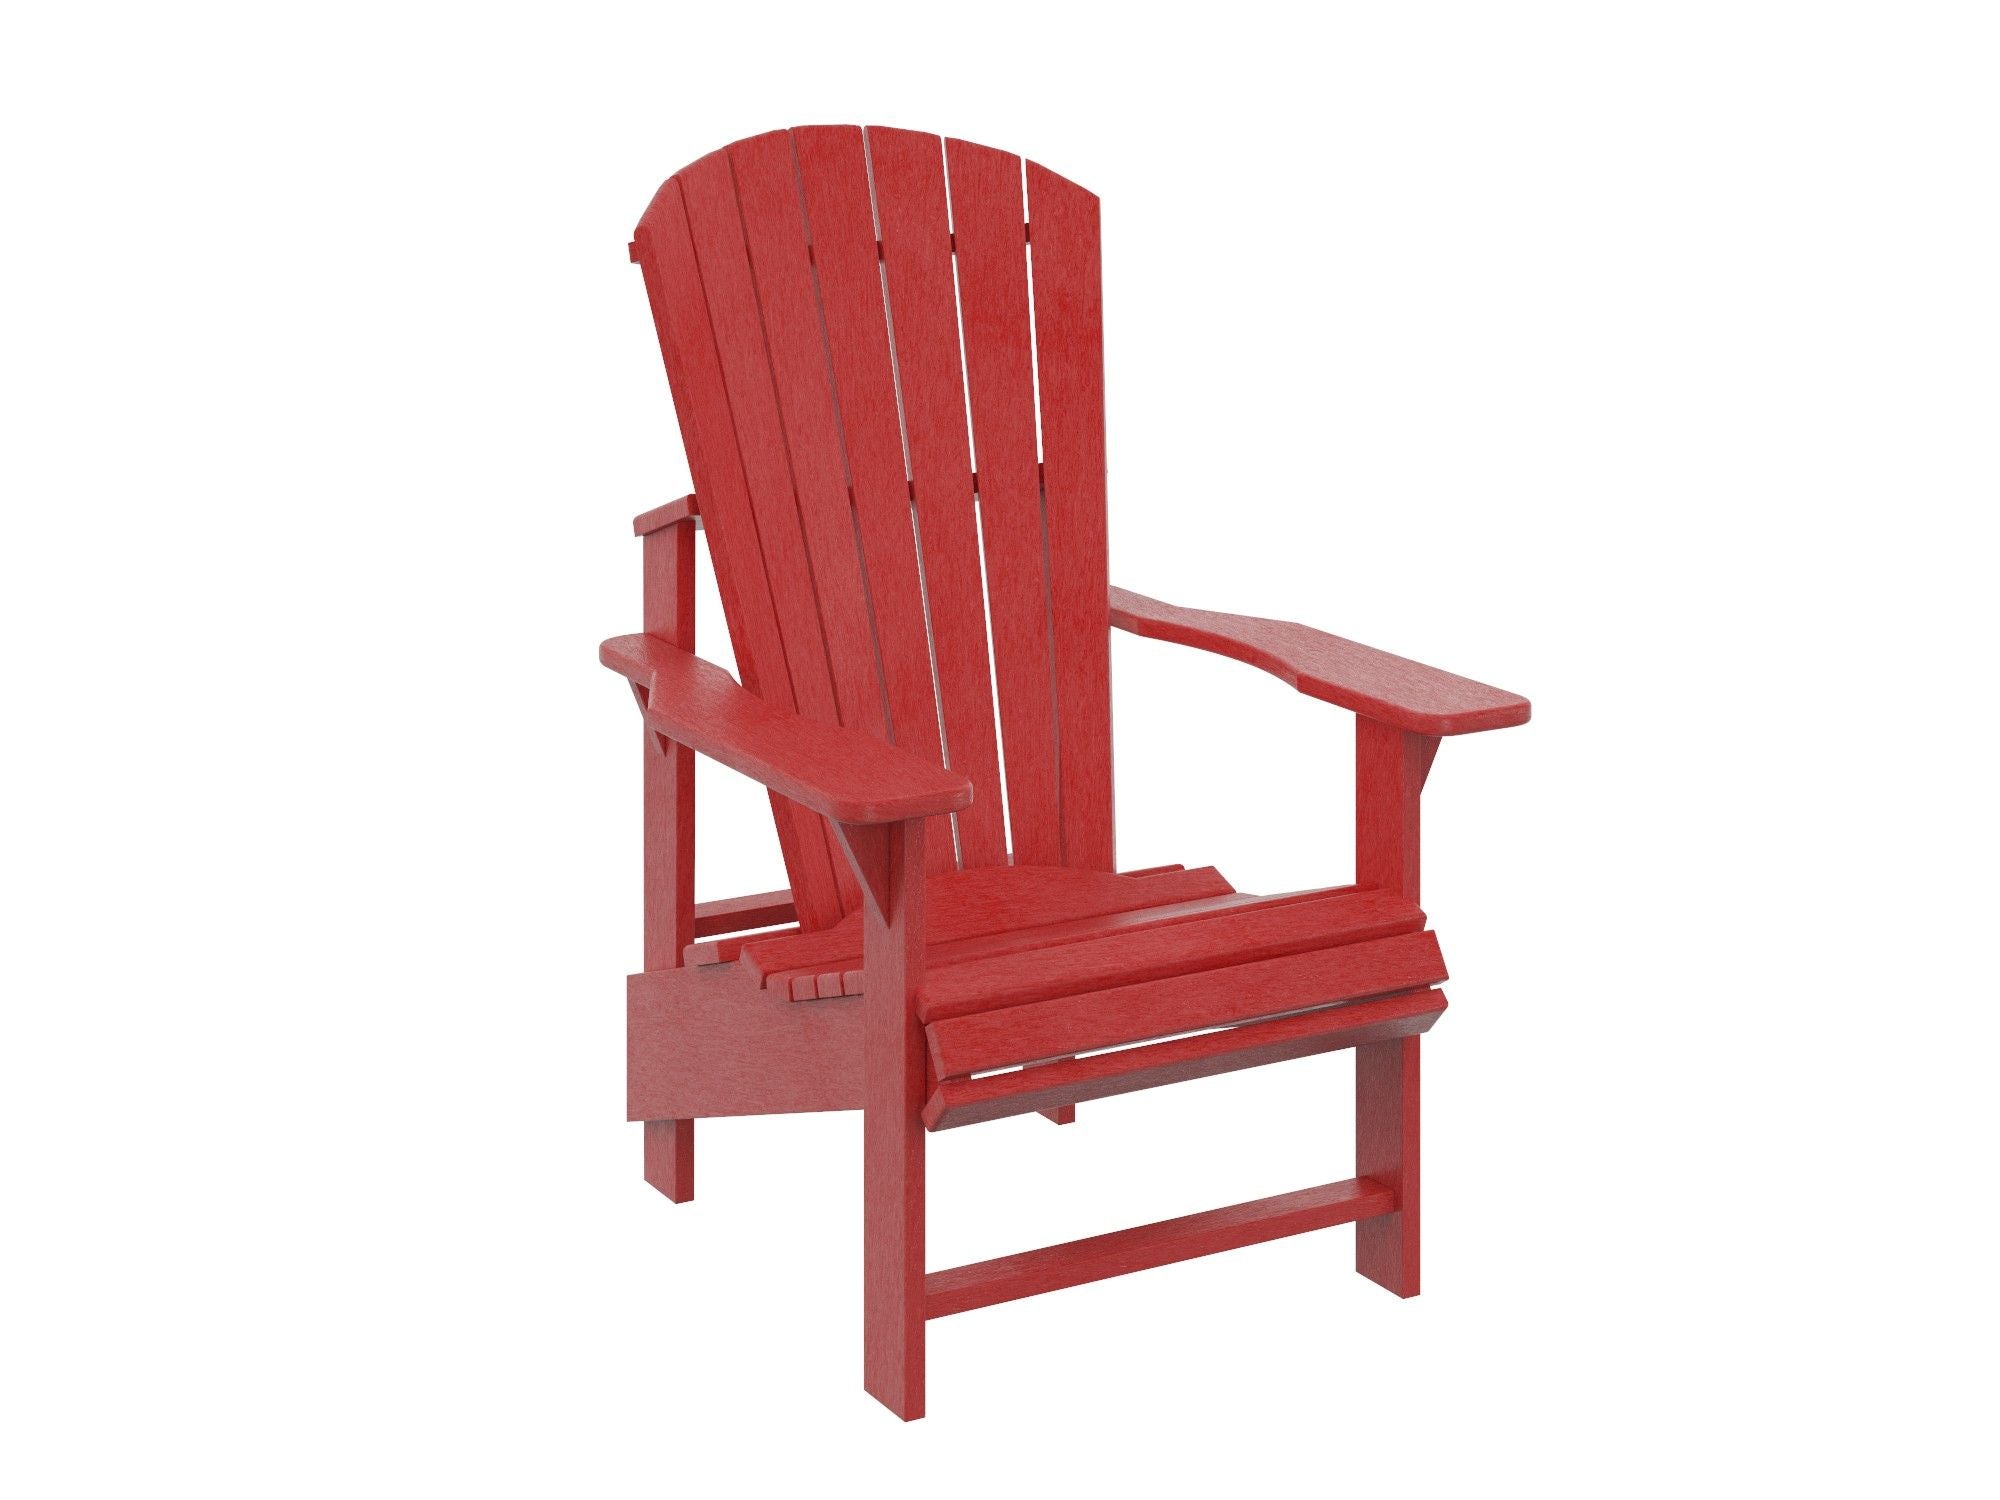 C.R. Plastic Products Upright Adirondack Chair Outdoor Chairs Red 12041193